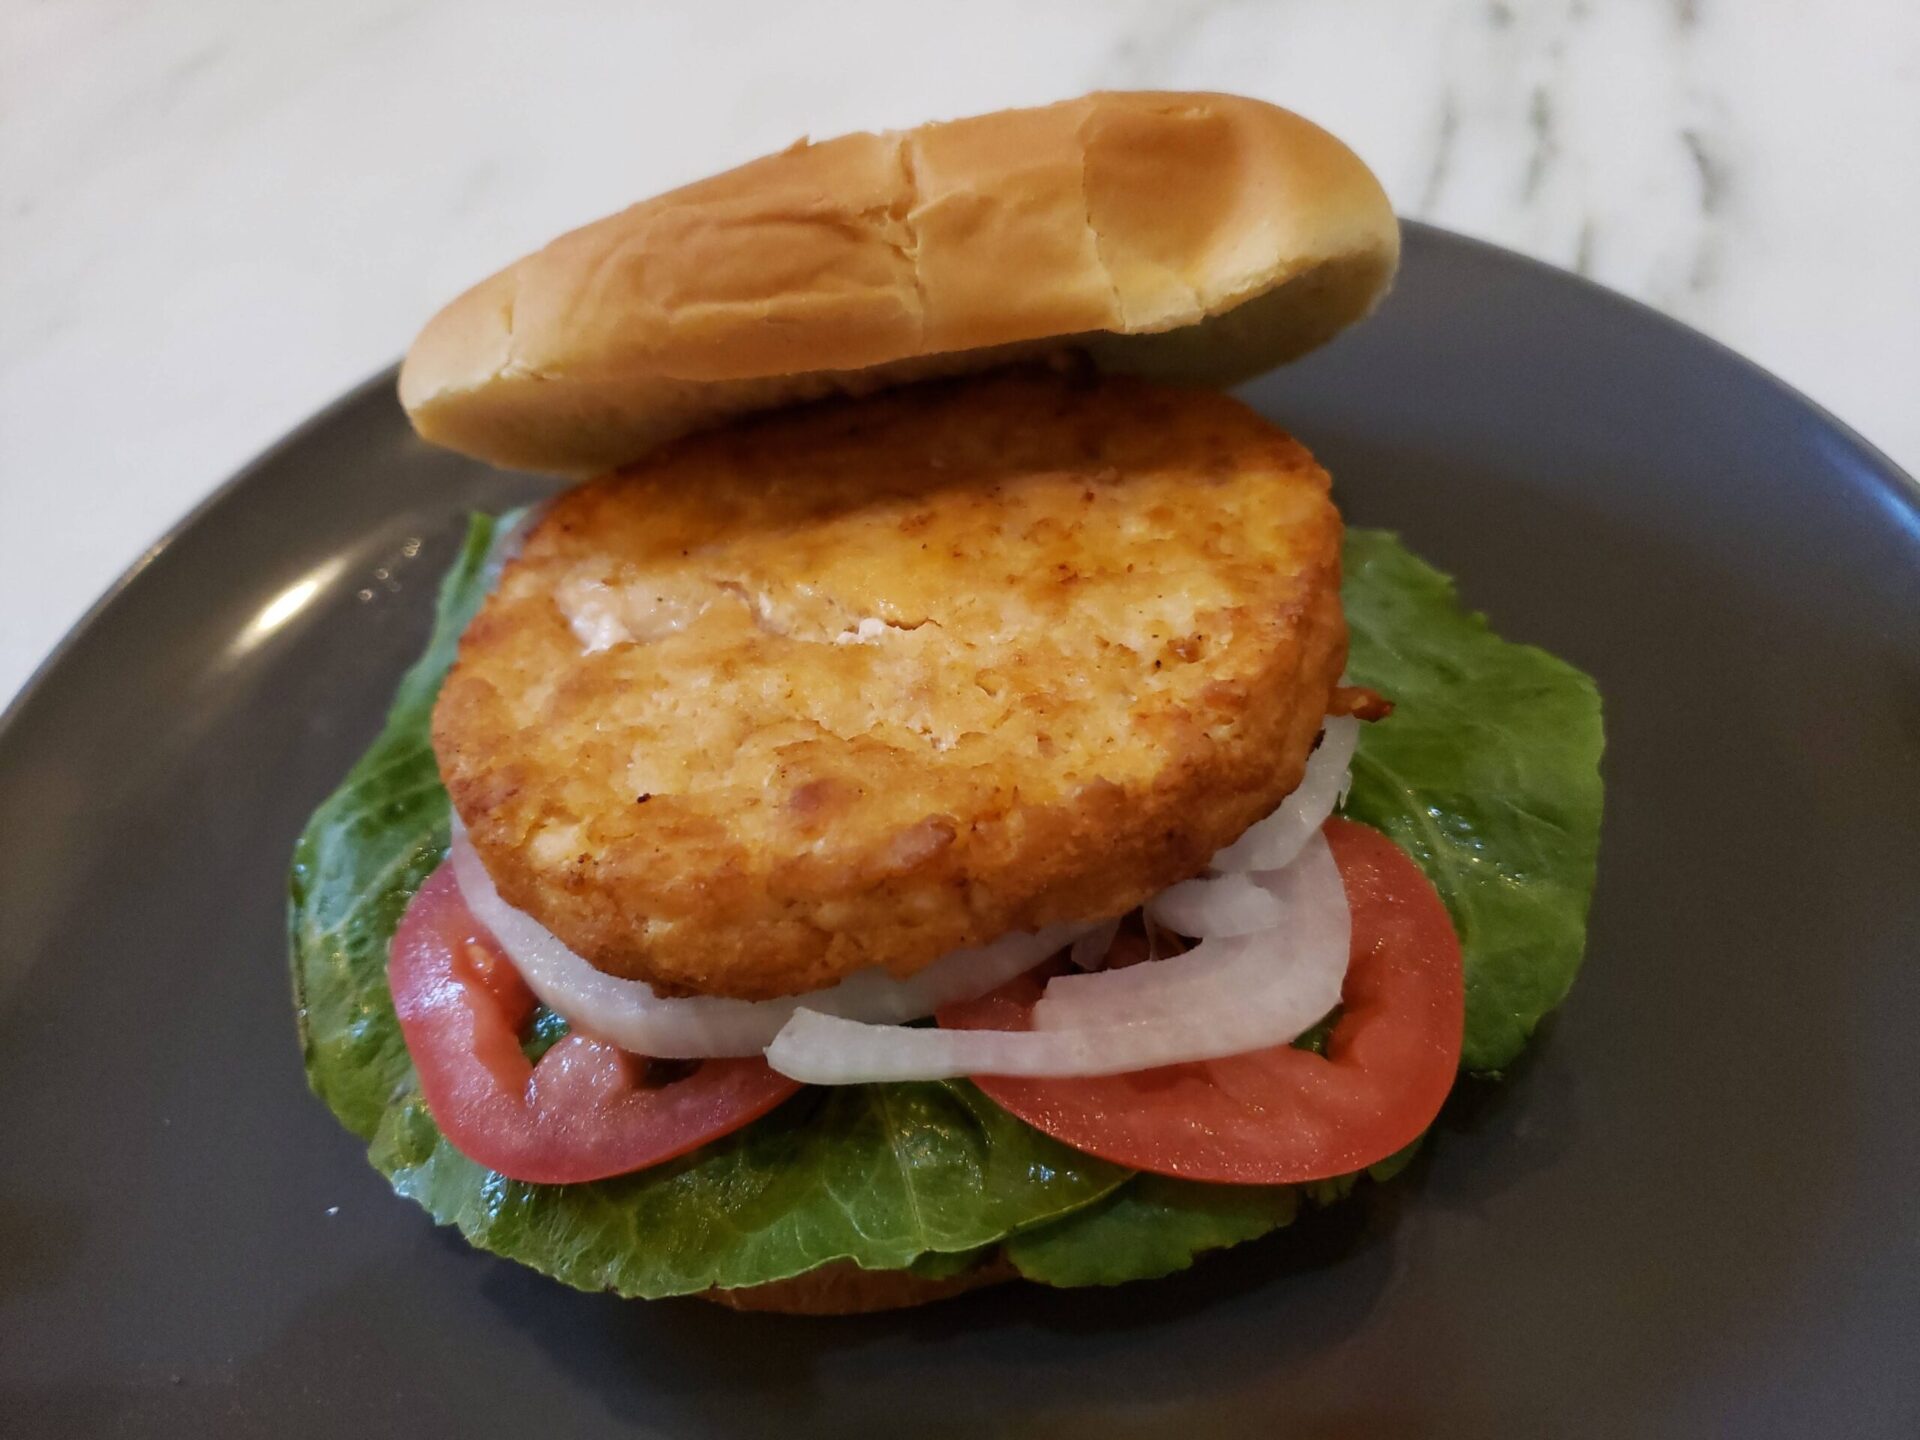 Salmon burgers went missing for a while. Now they're back. : r/Costco